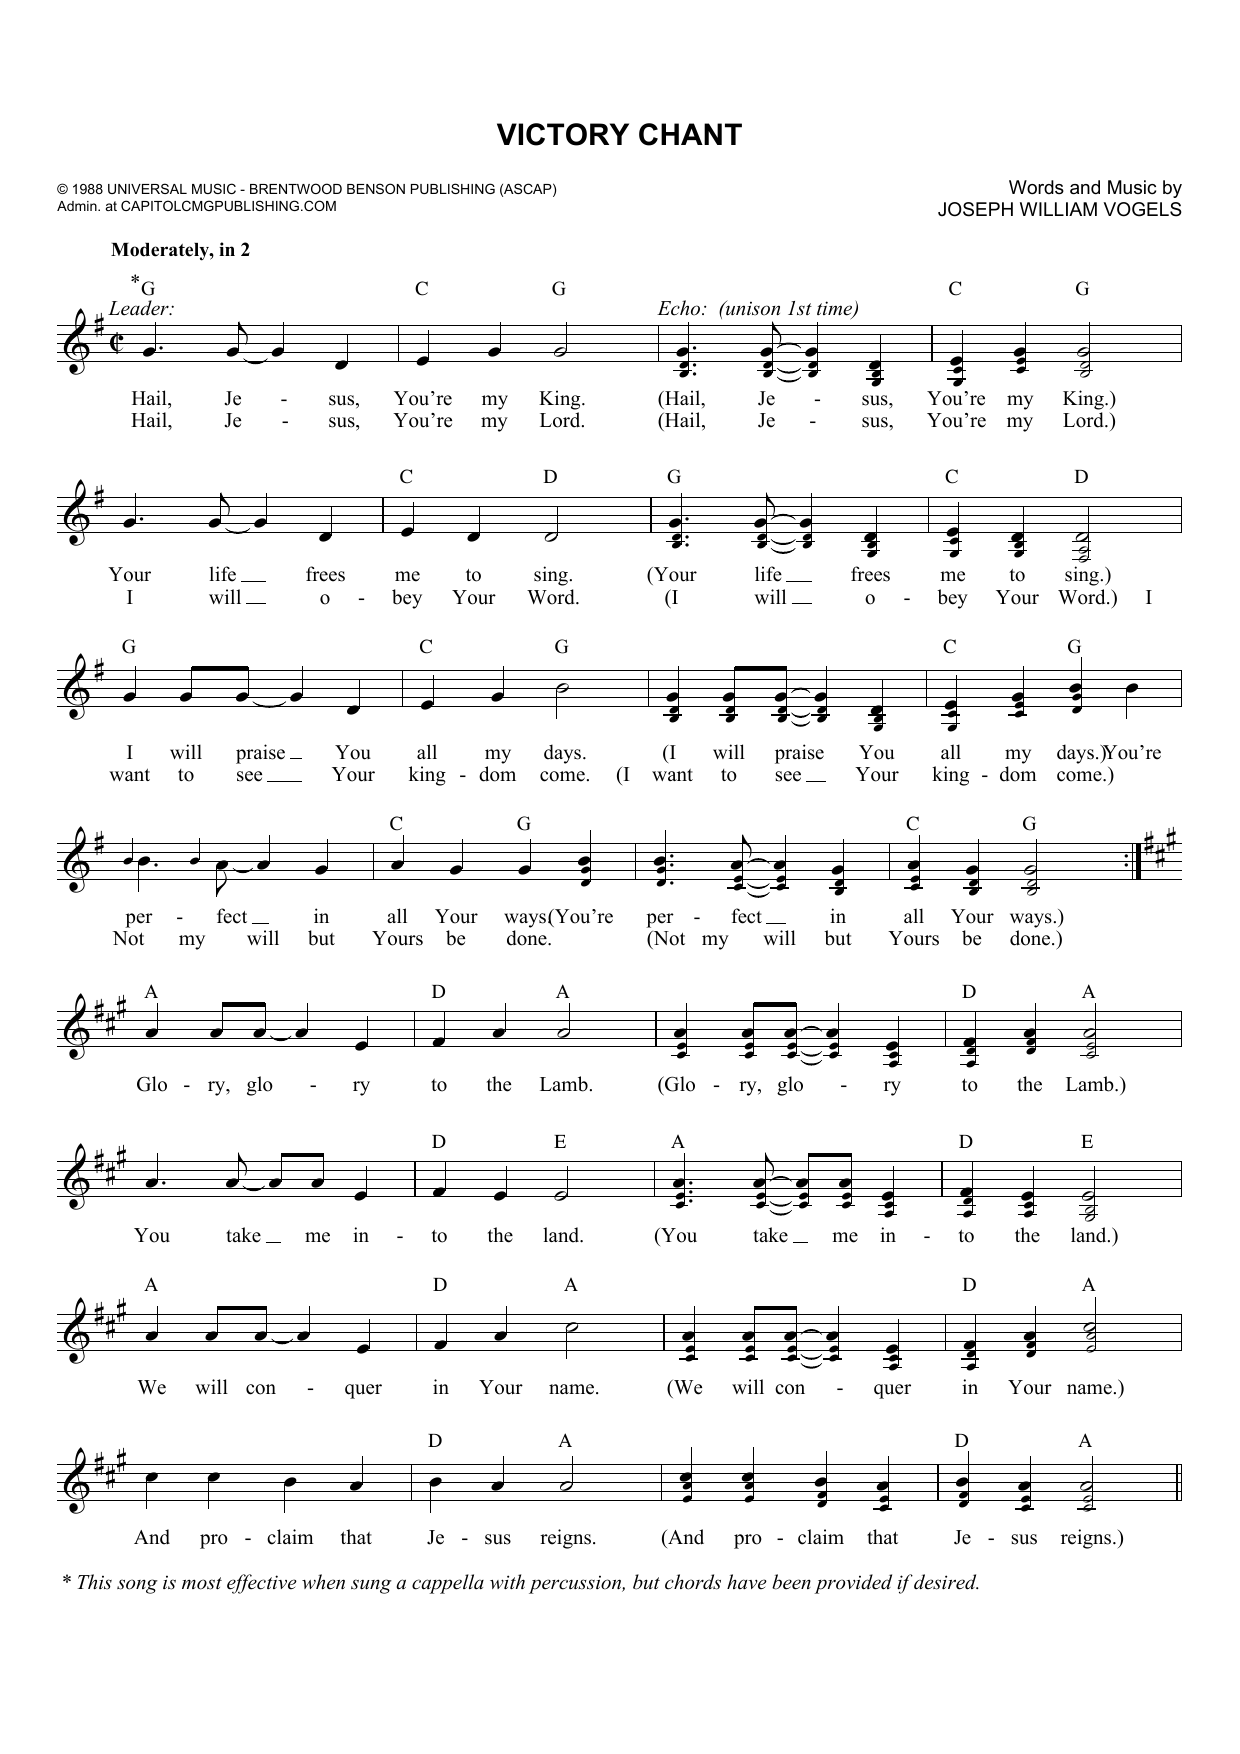 Download Joseph Williams Vogels Victory Chant Sheet Music